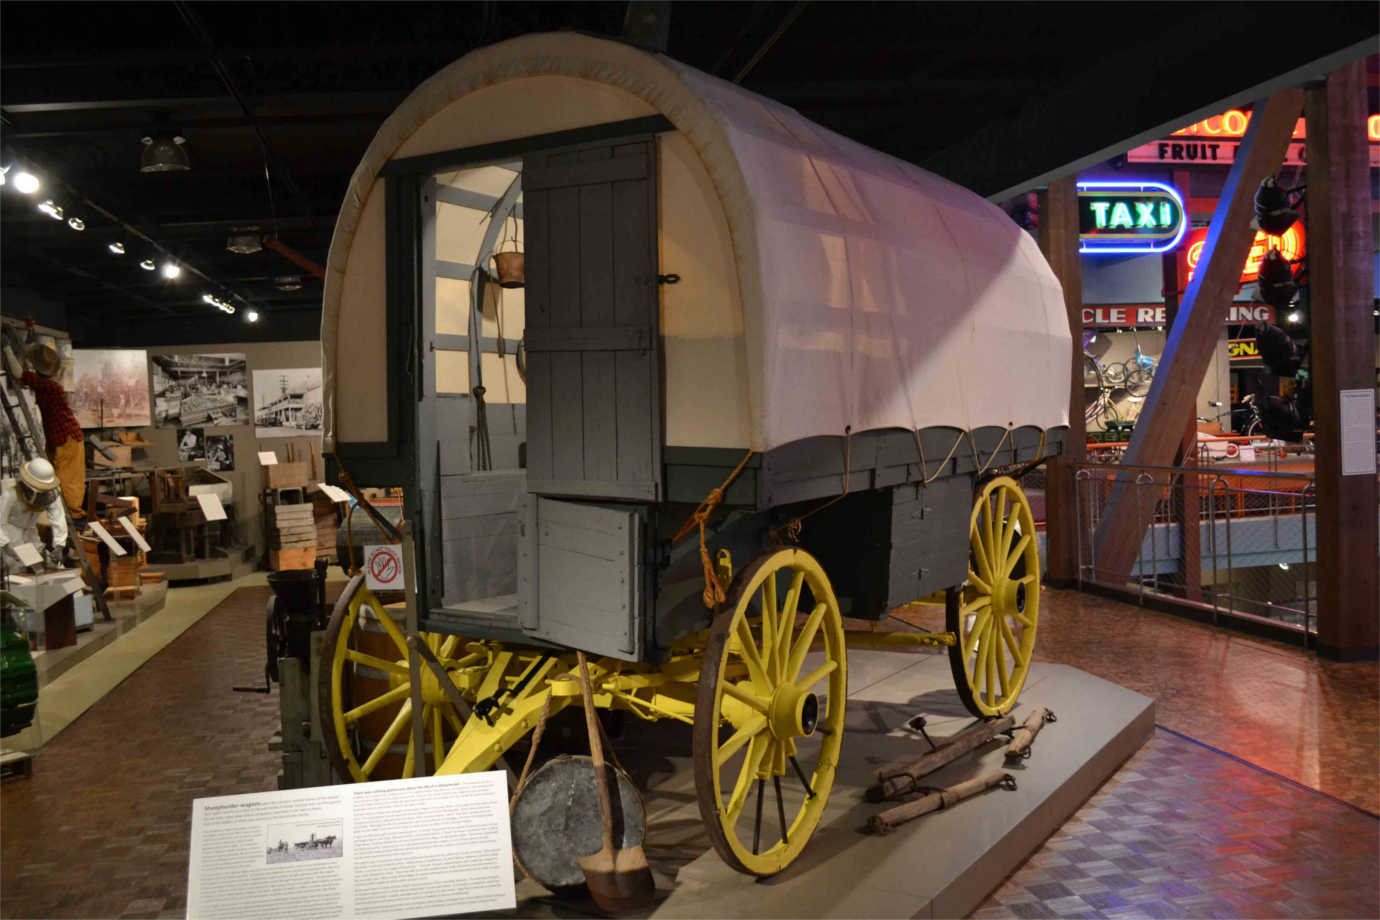 The Yakima Valley Museum provides visitors with an in-depth look at the region’s history and culture through exhibitions focused on the land, people, community, and technology that has kept the Yakima Valley connected to the nation and world. Image courtesy of the Yakima Valley Museum.